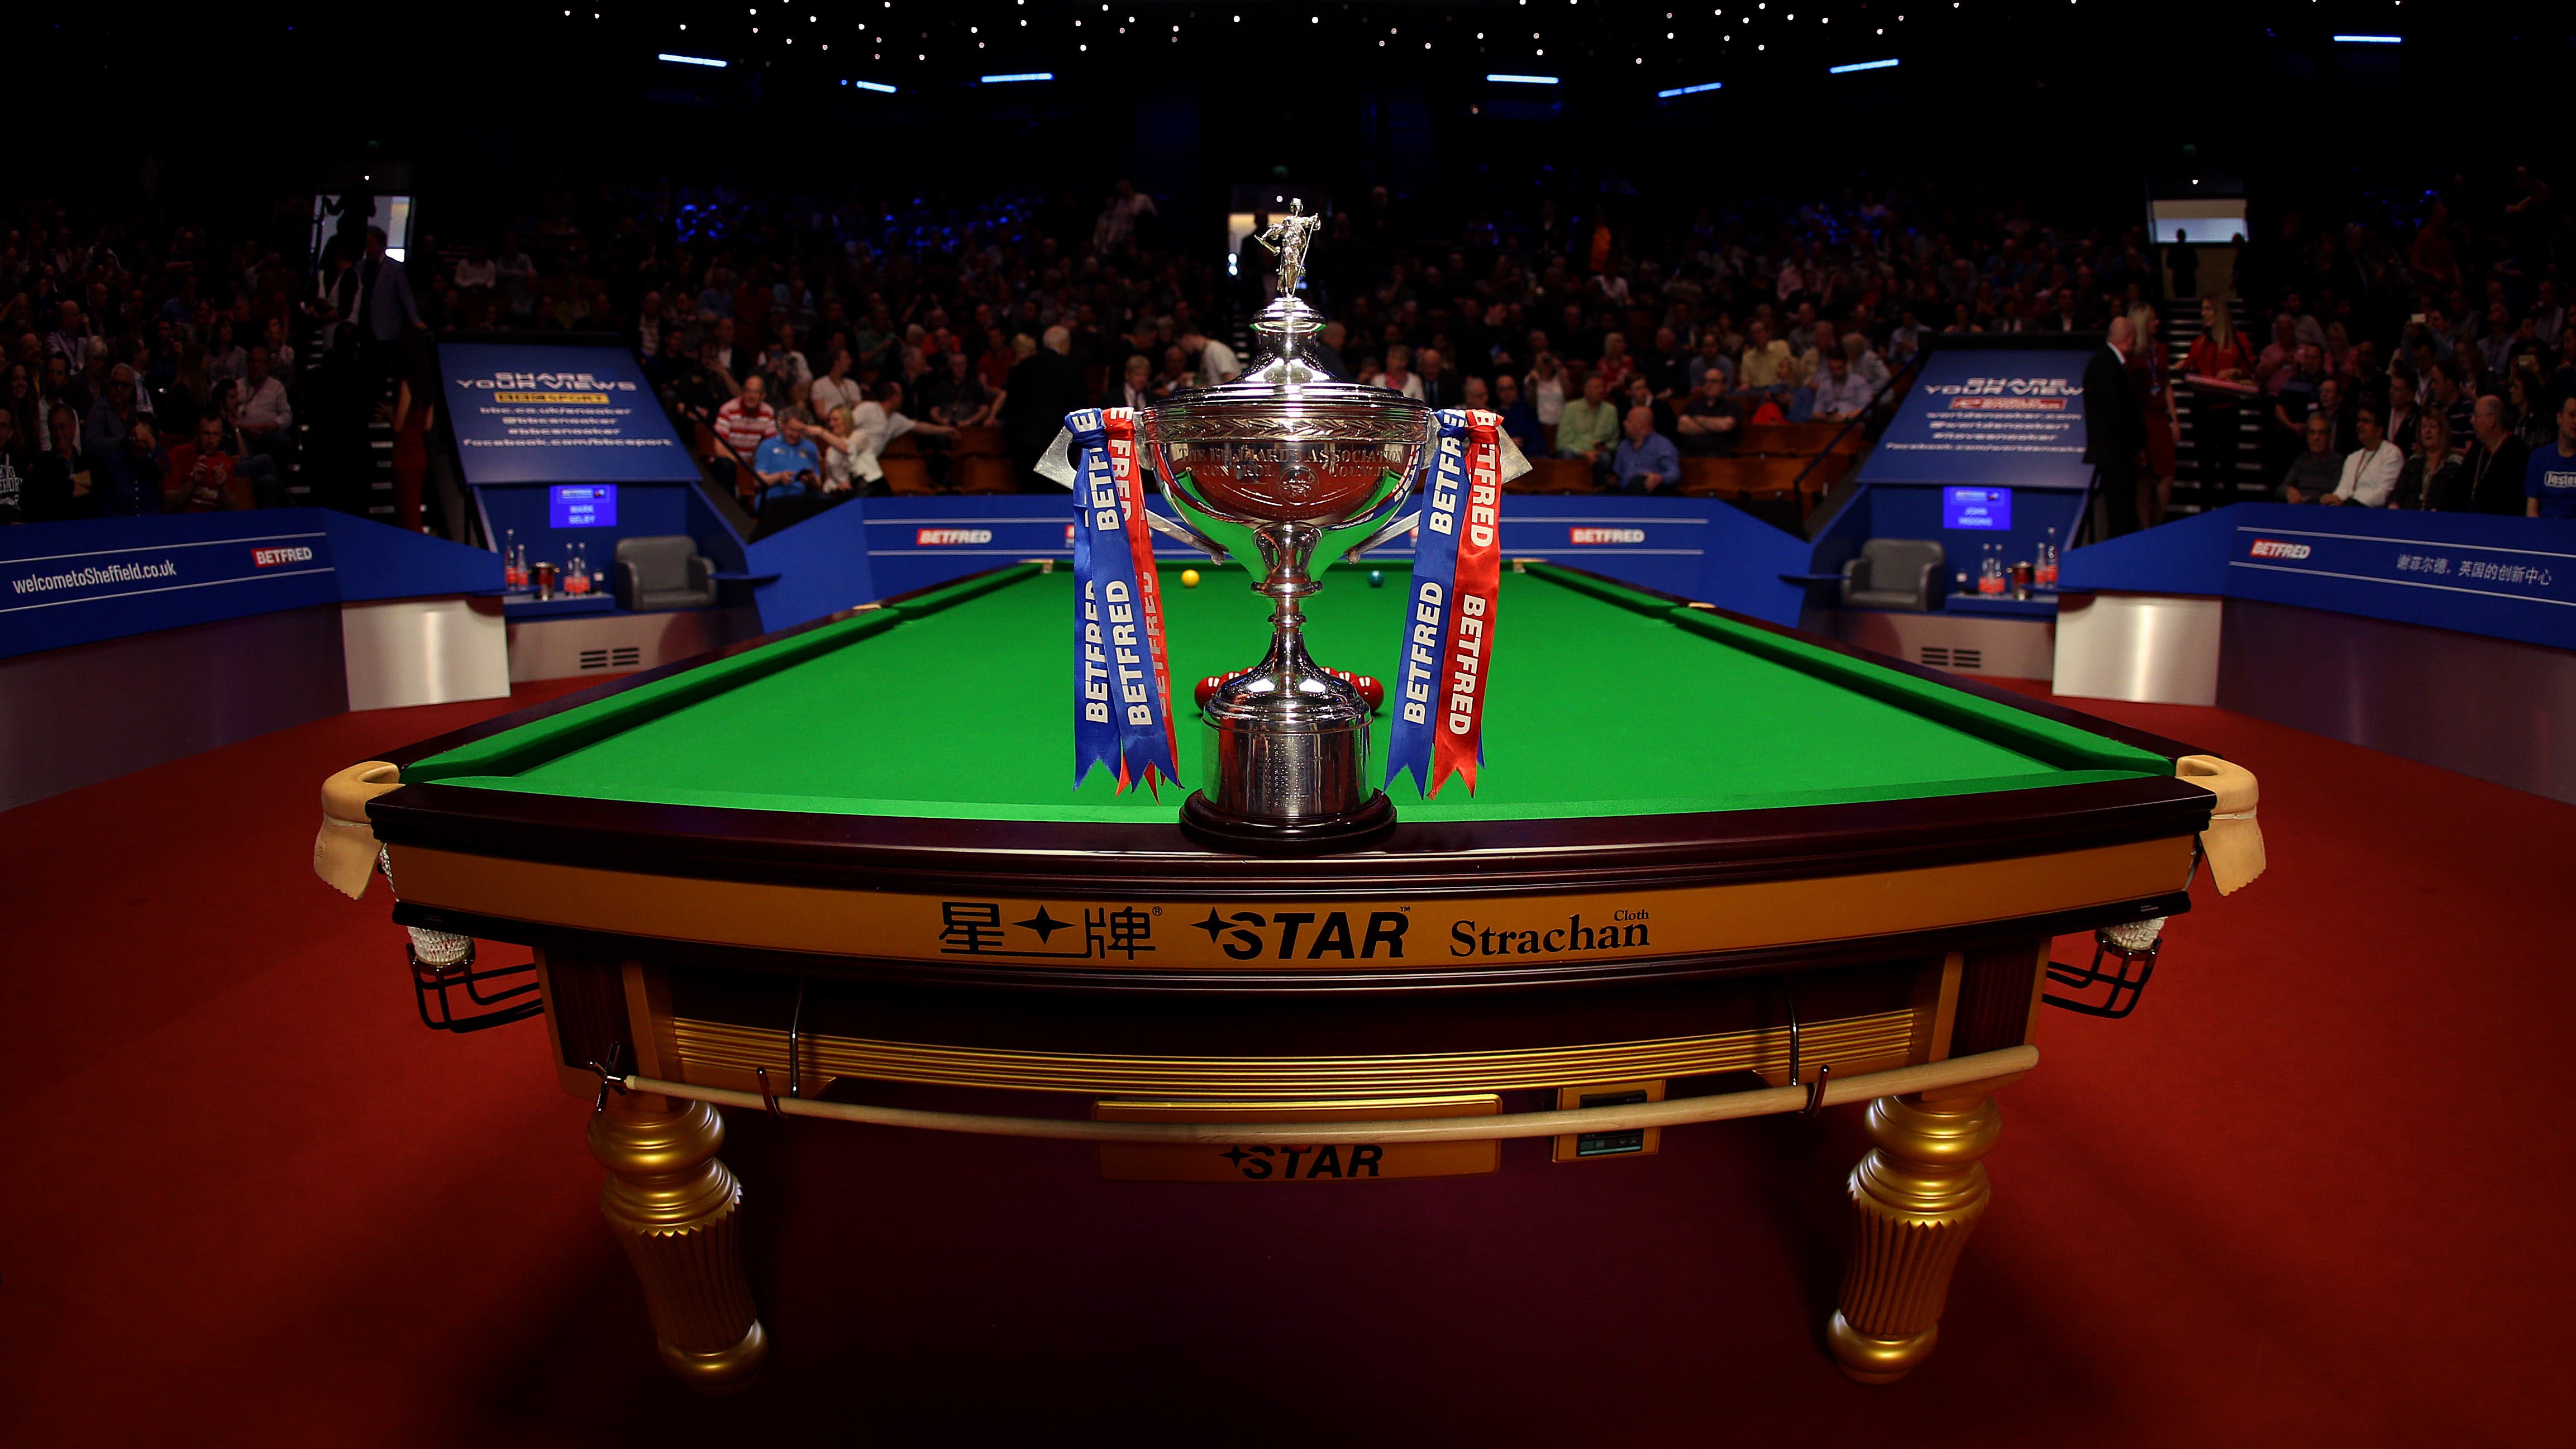 Capacity crowd expected to be able to attend World Snooker Championship